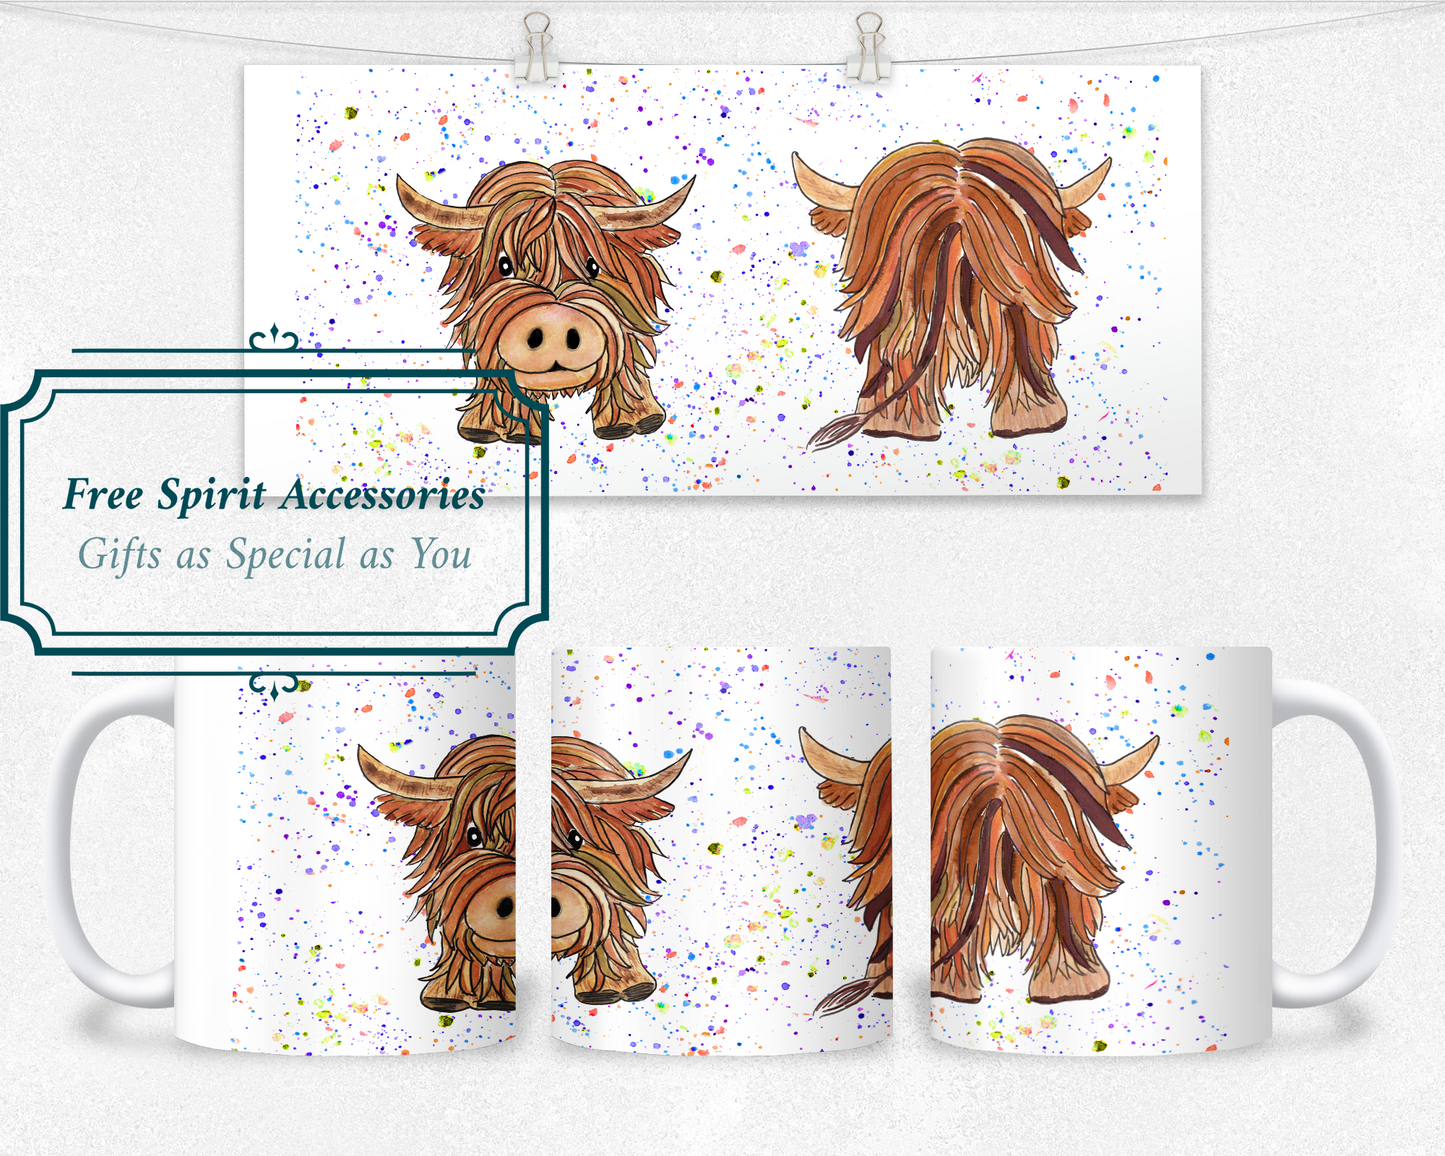  Cute Highland Cow Front and Rear View Mug by Free Spirit Accessories sold by Free Spirit Accessories